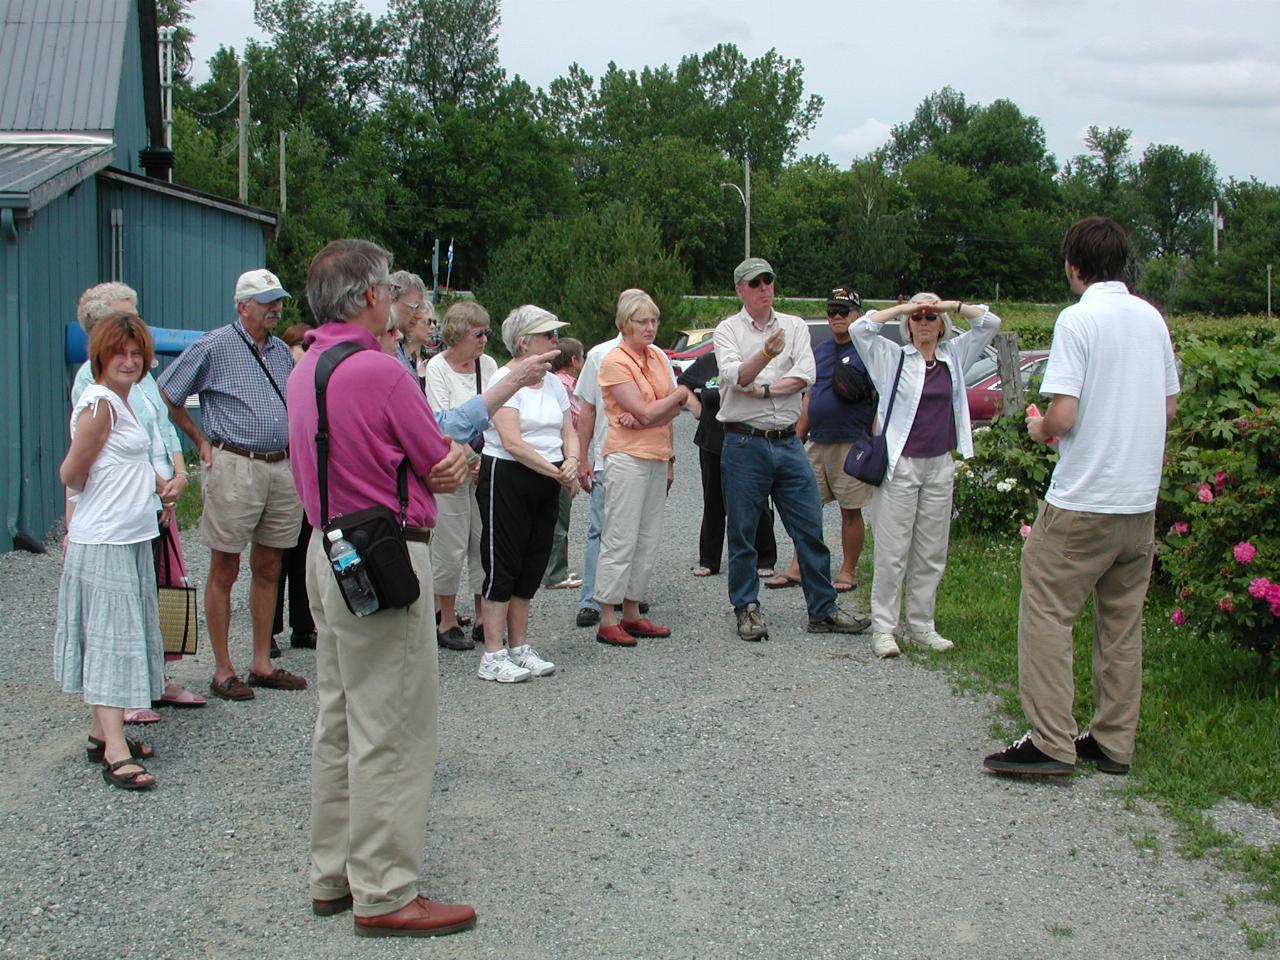 Winery guide talking to KPLU Tour group about vine growing in the region